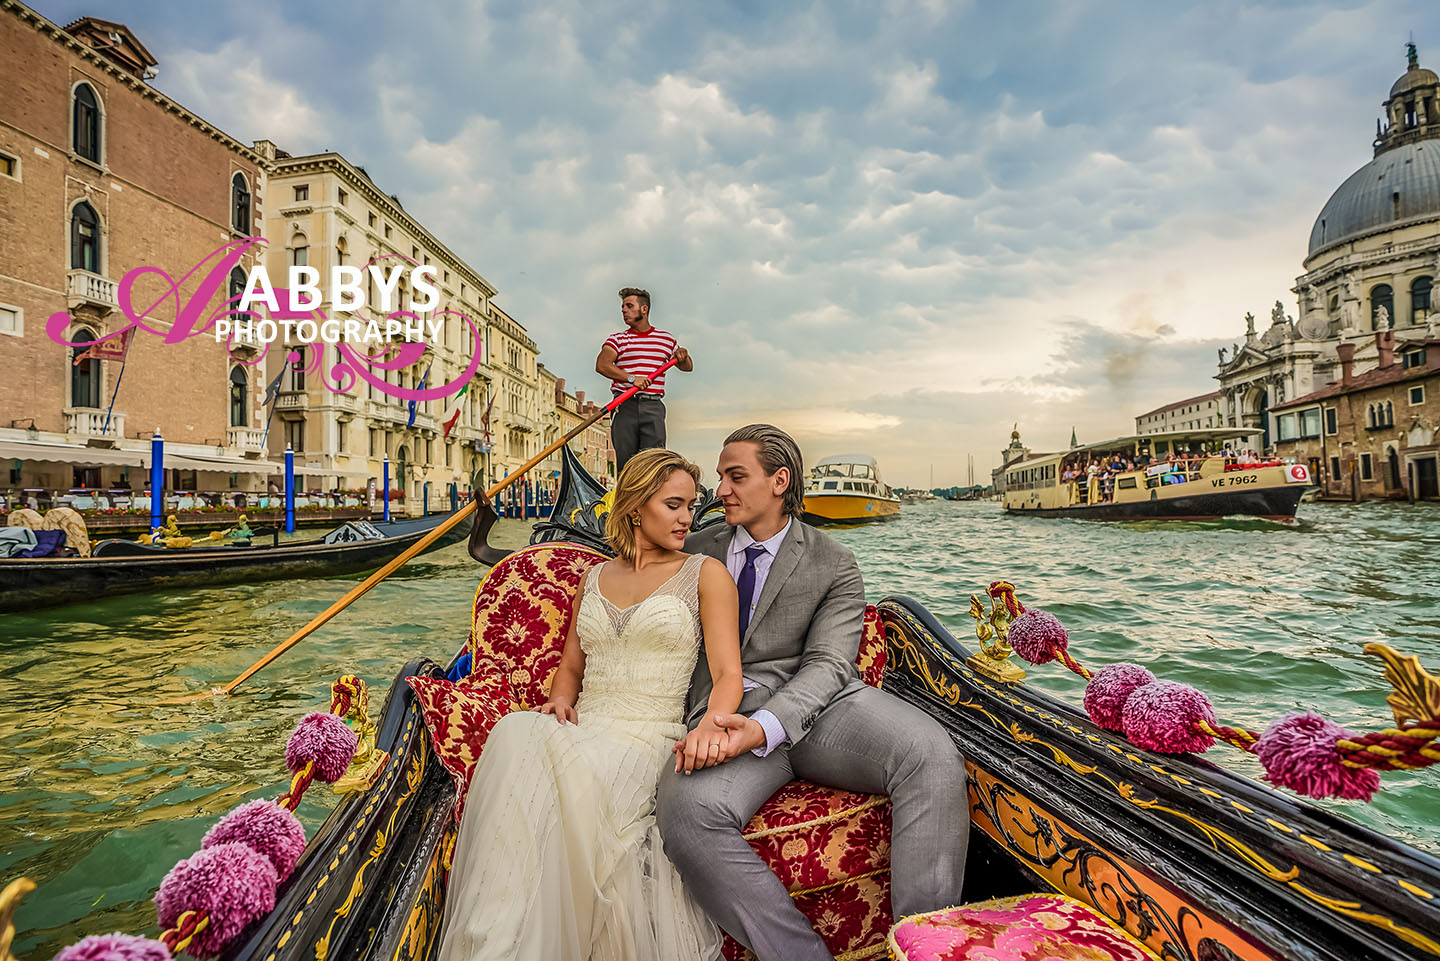 Abbys Photography can make you feel like your wedding or engagement is in Venice instead of Bakersfield. Call 661-342-4945  